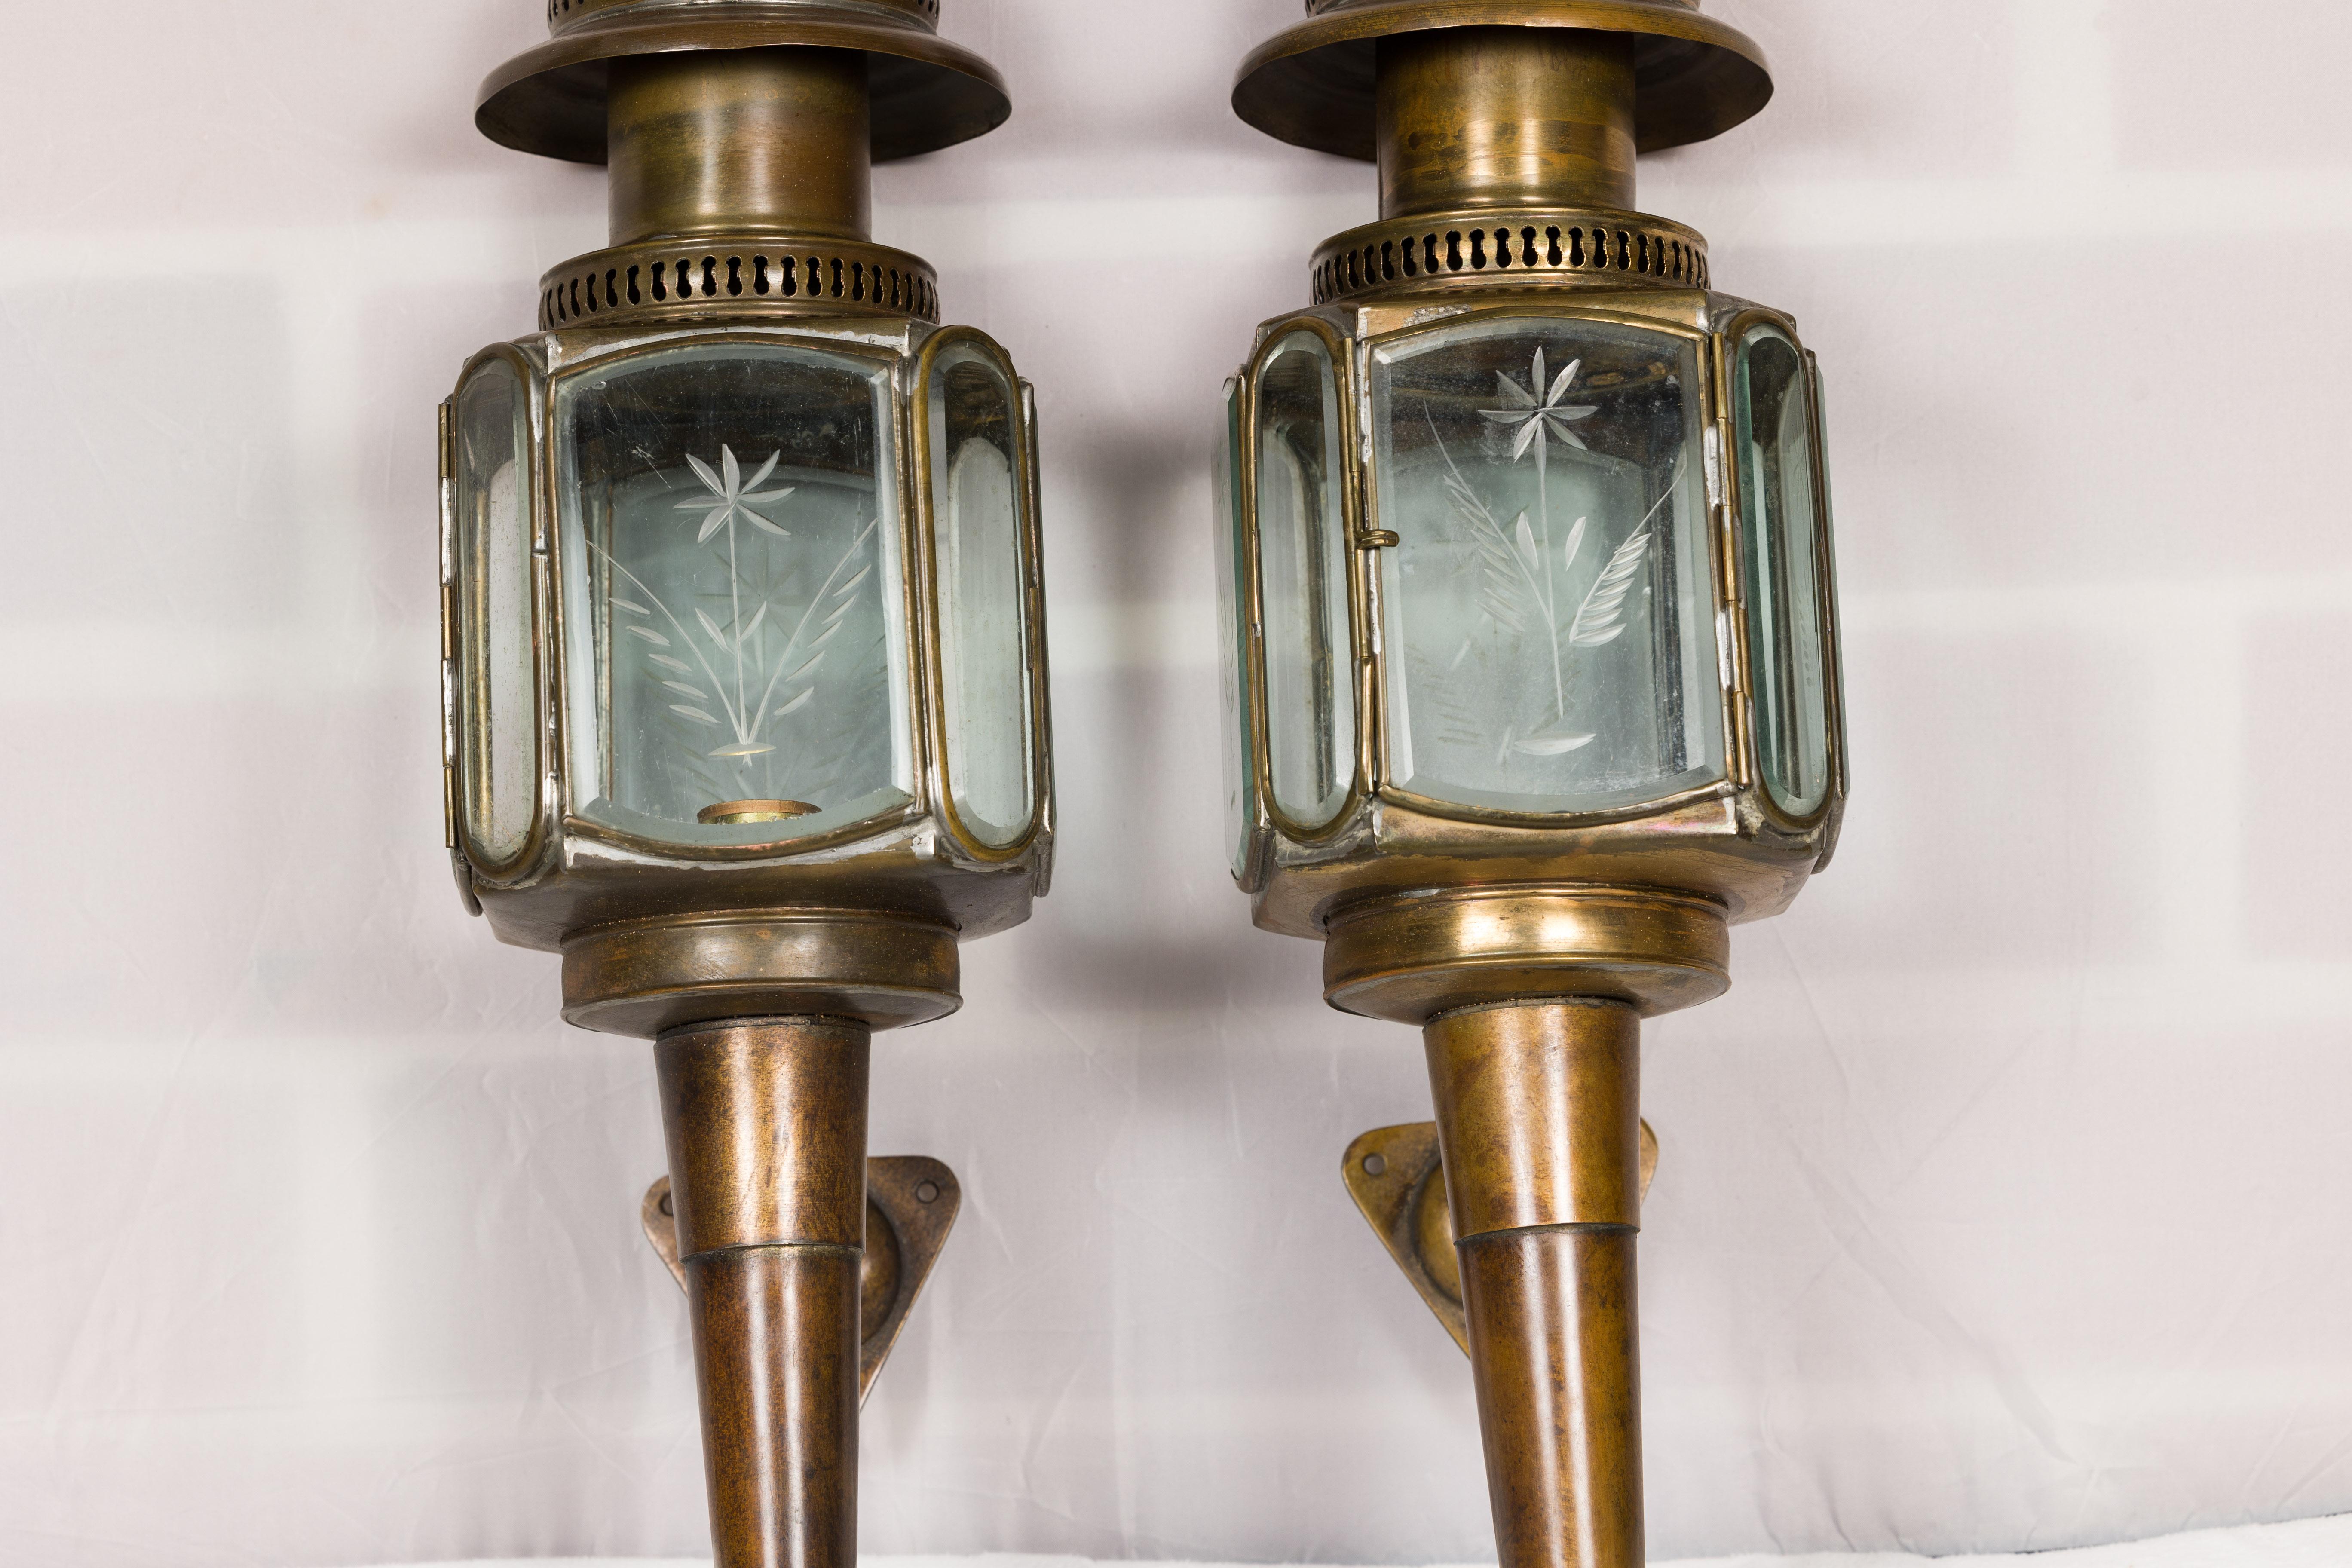 Pair of American Turn of the Century Wall Lanterns with Etched Glass, circa 1900 For Sale 4